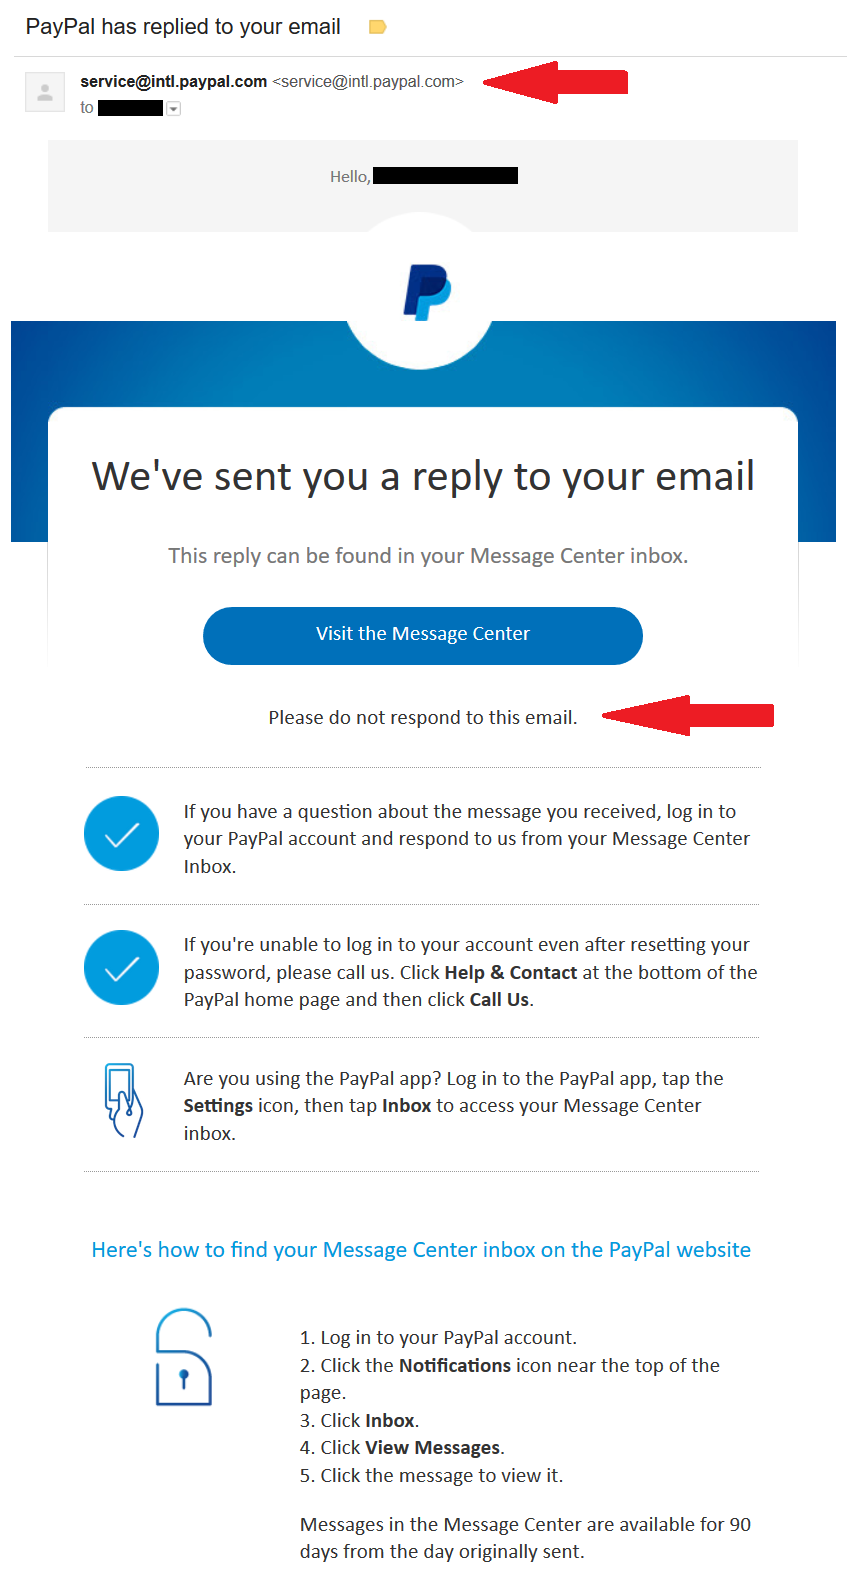 paypal-has-replied-to-your-email-full-mail